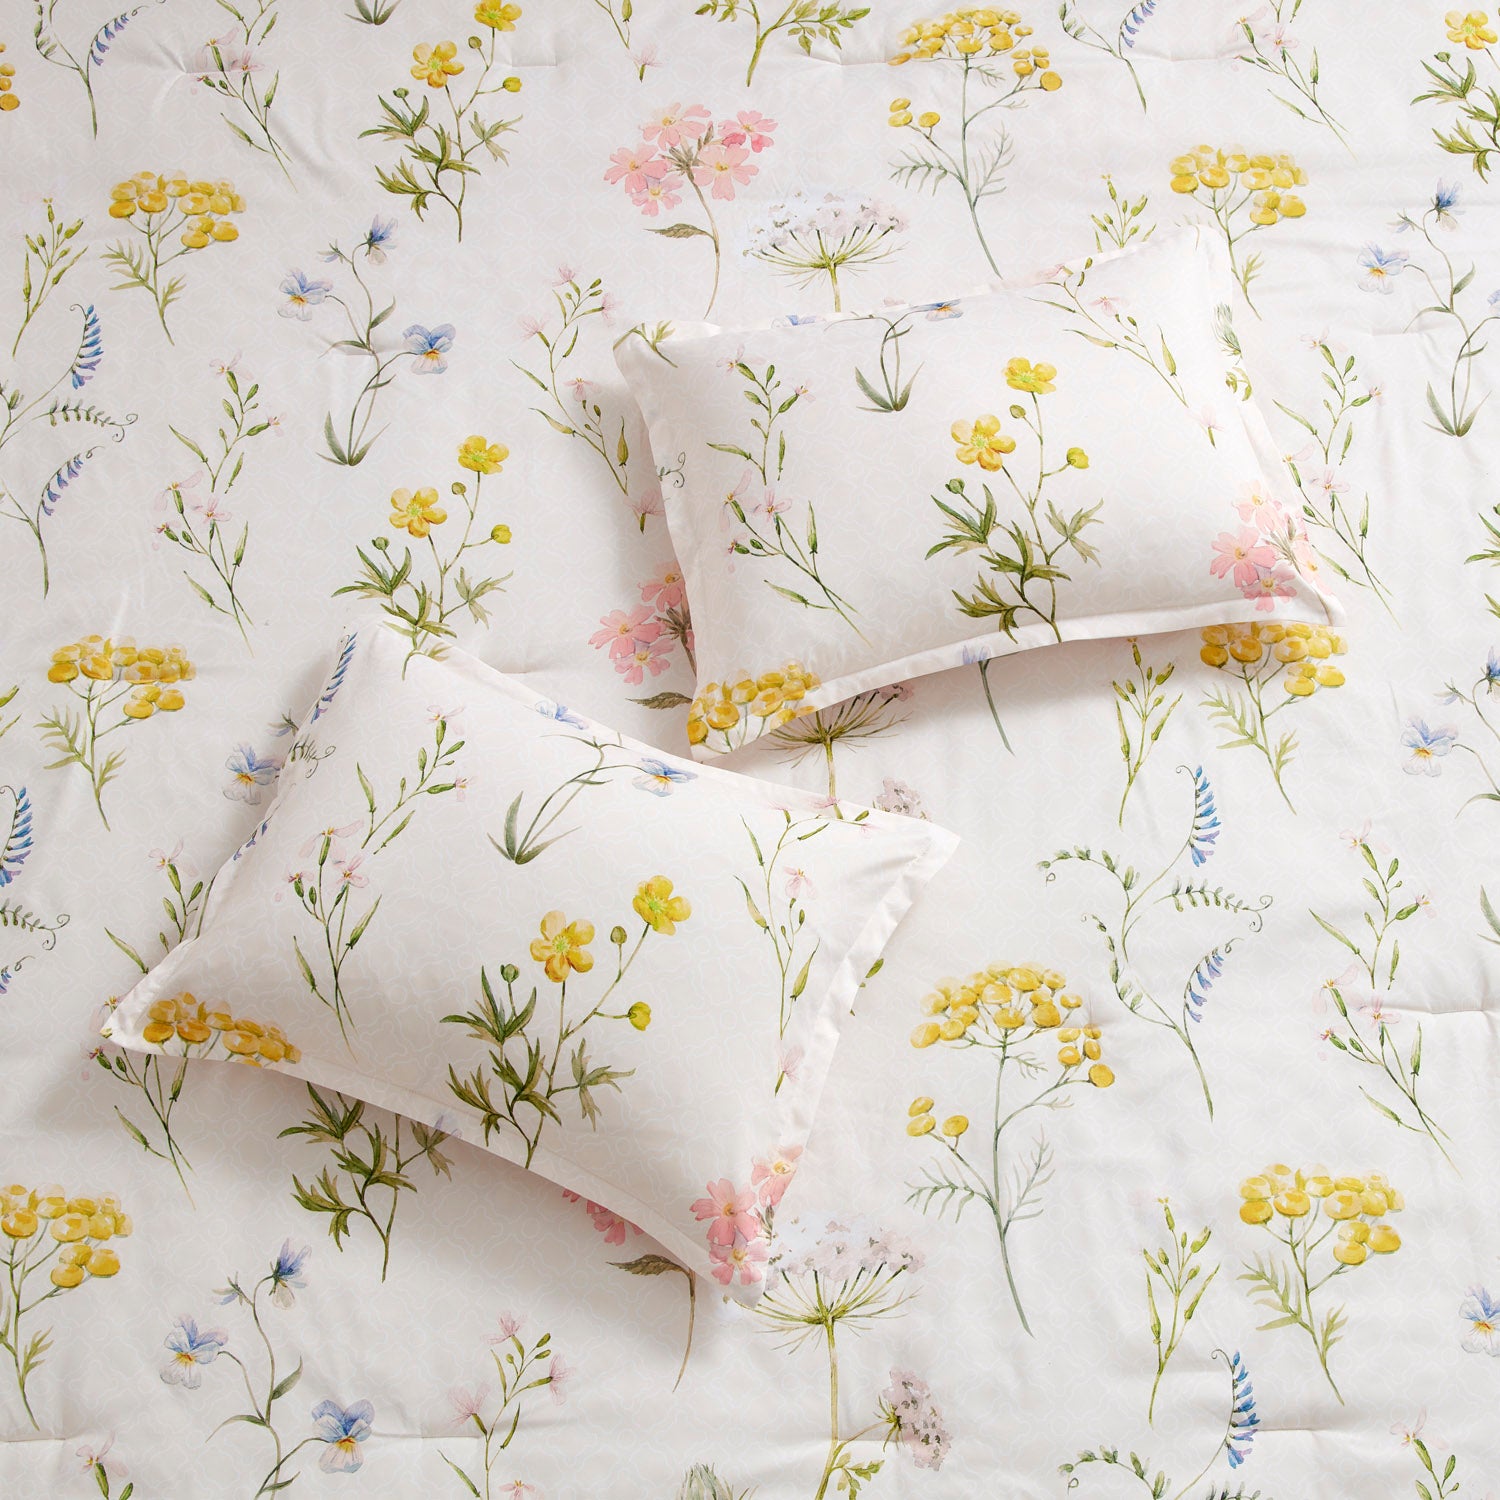 Mazie Flowers 7-Piece Bed in a Bag Set - Pillowcases